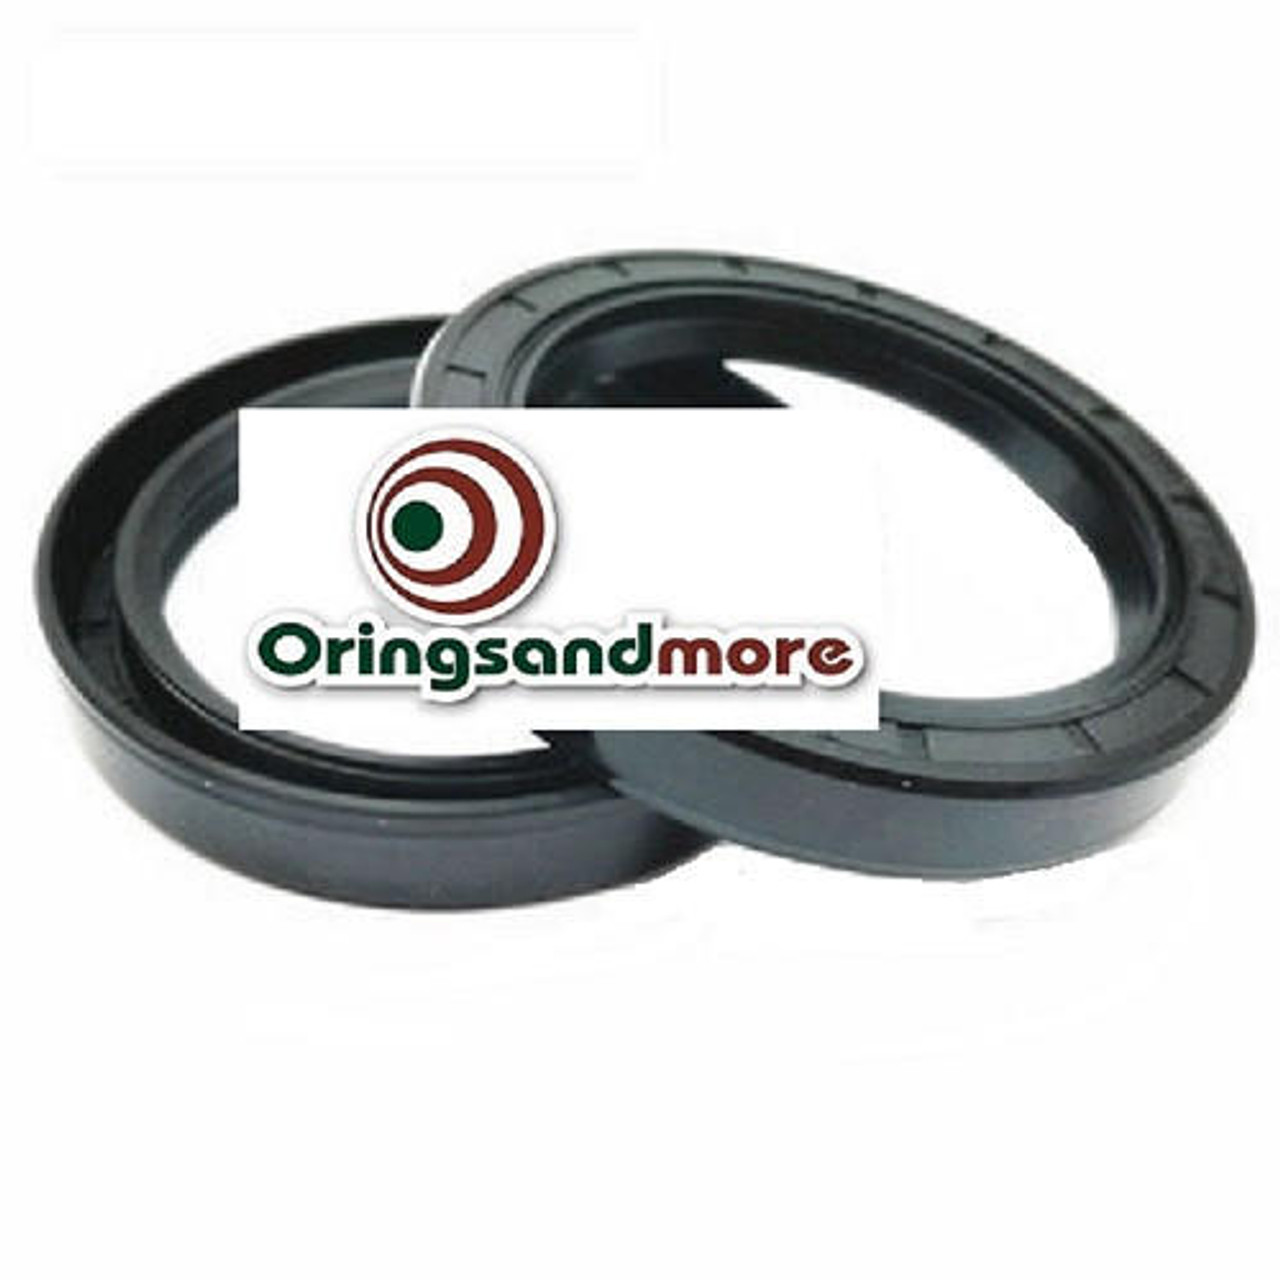 Metric Oil Shaft Seal 50 x 90 x 10mm Double Lip   Price for 1 pc